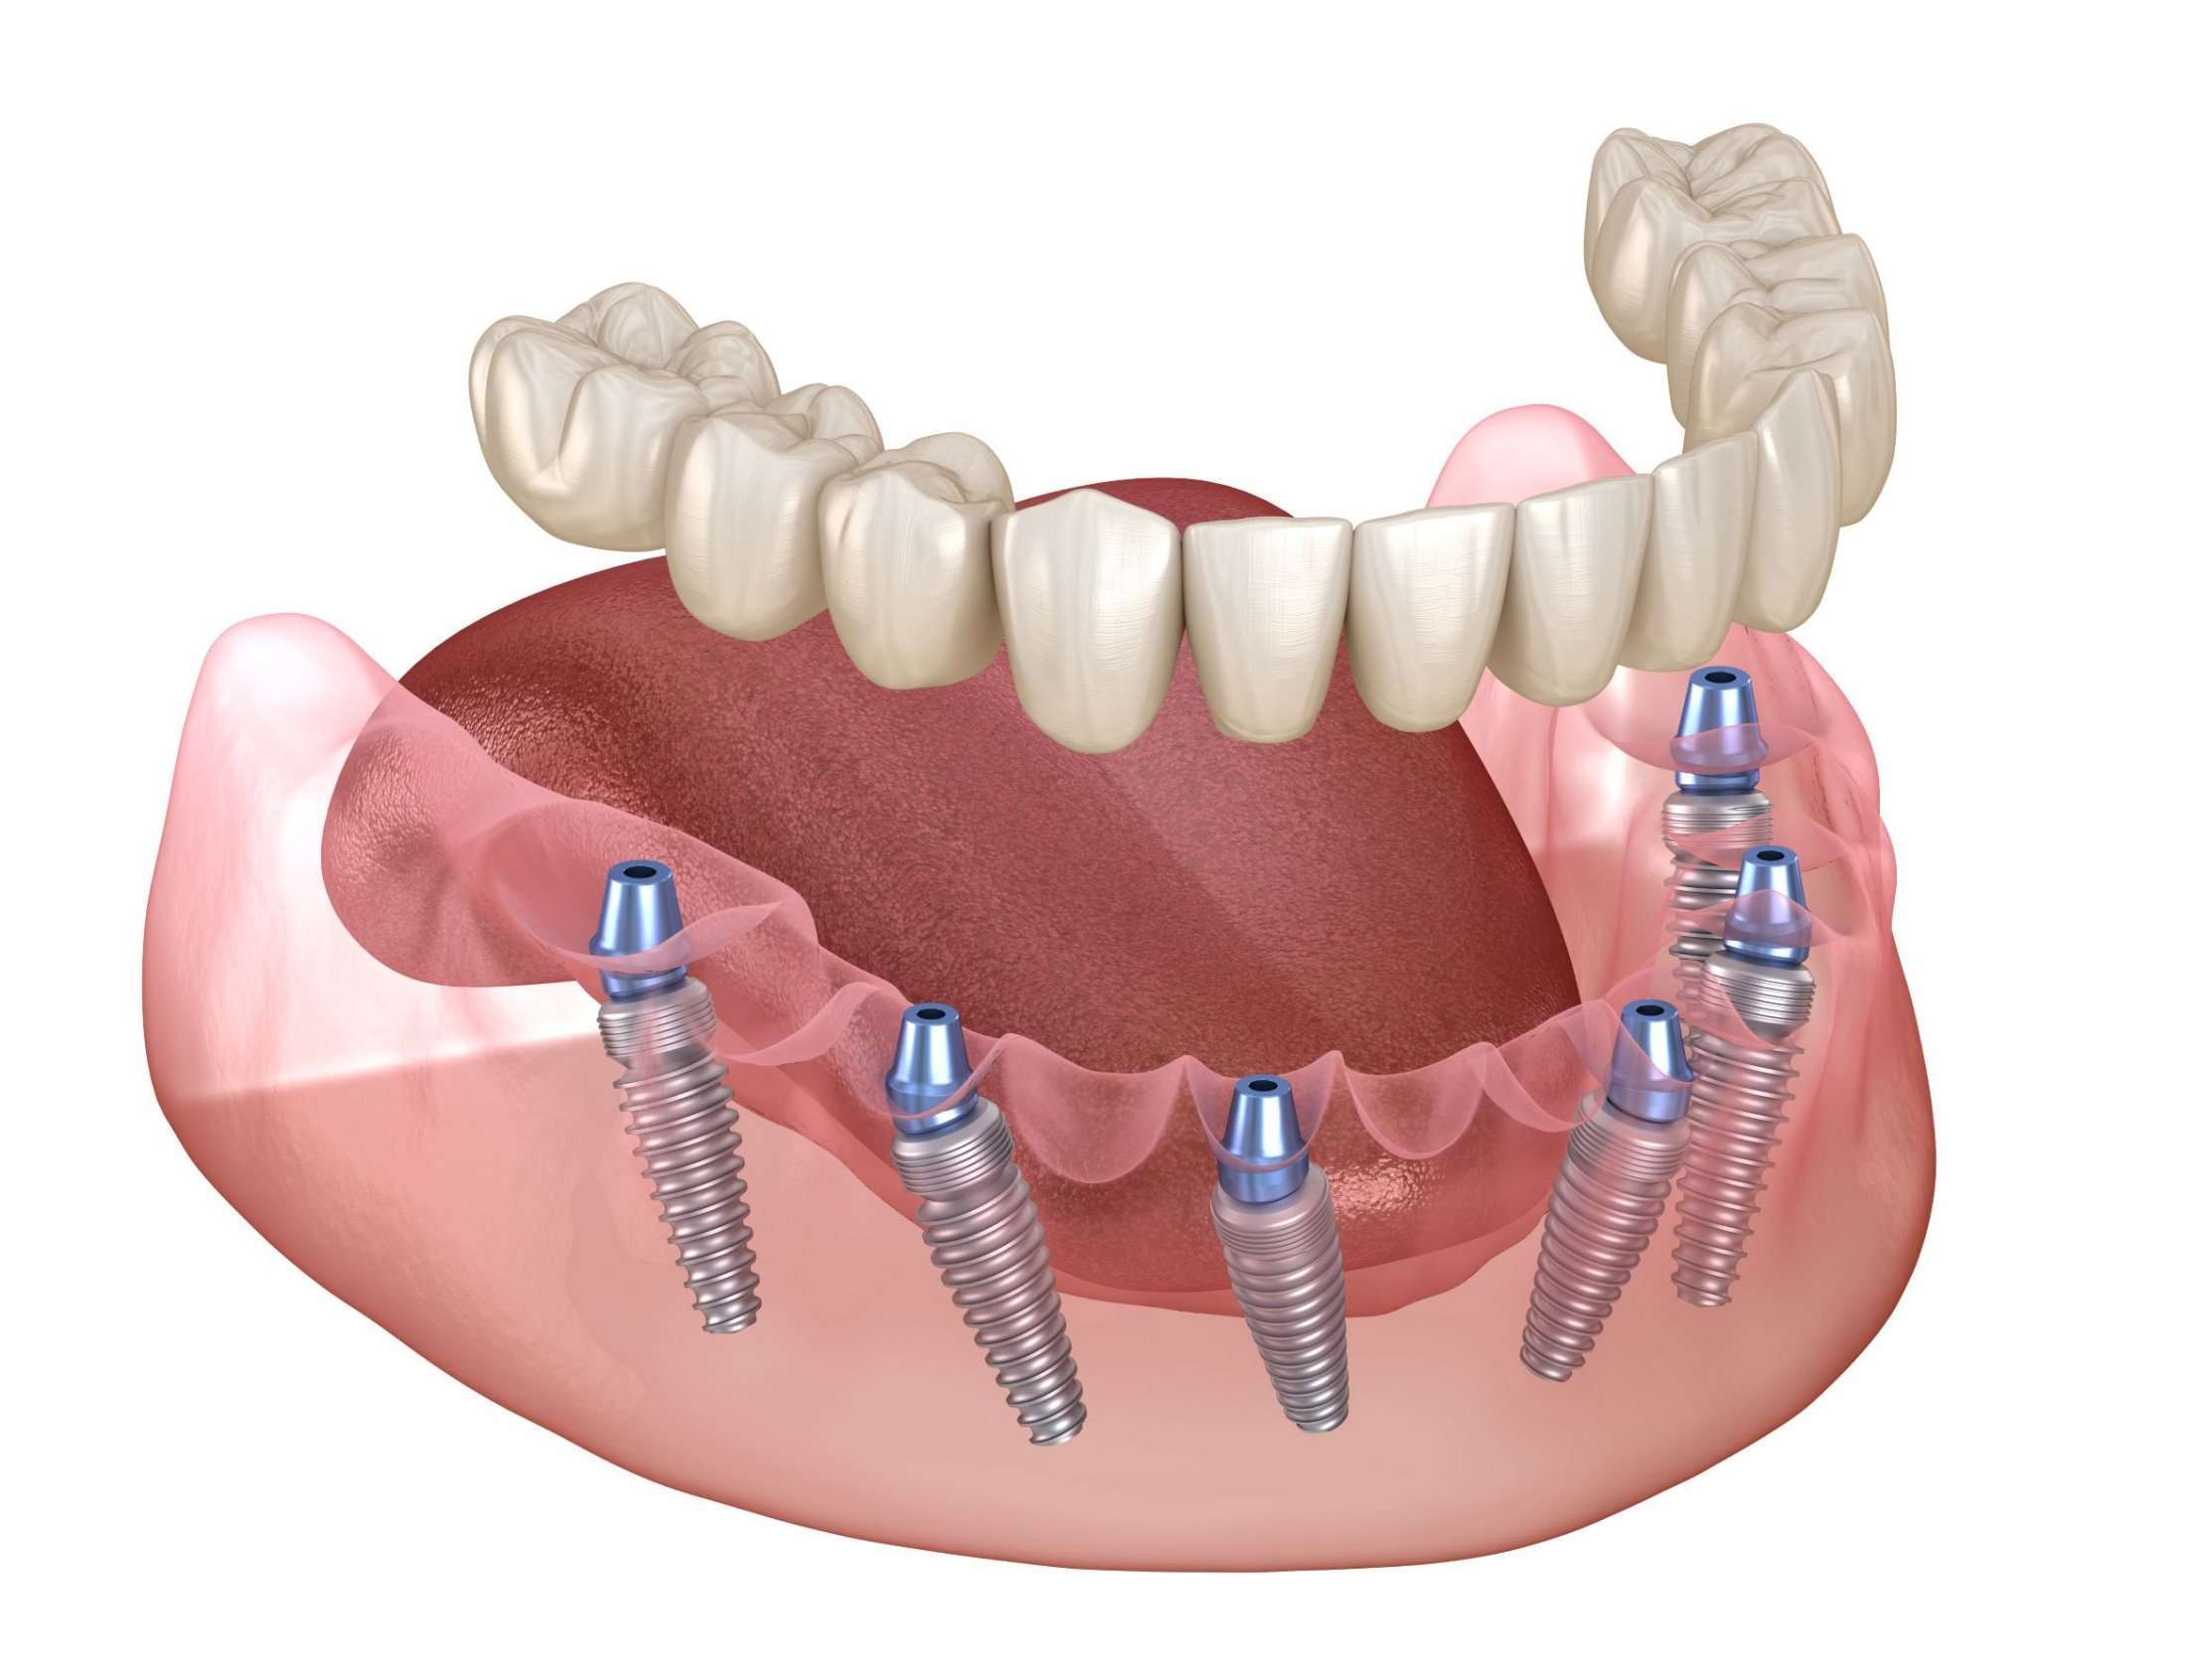 Full Arch Implants for Complete Teeth Replacement